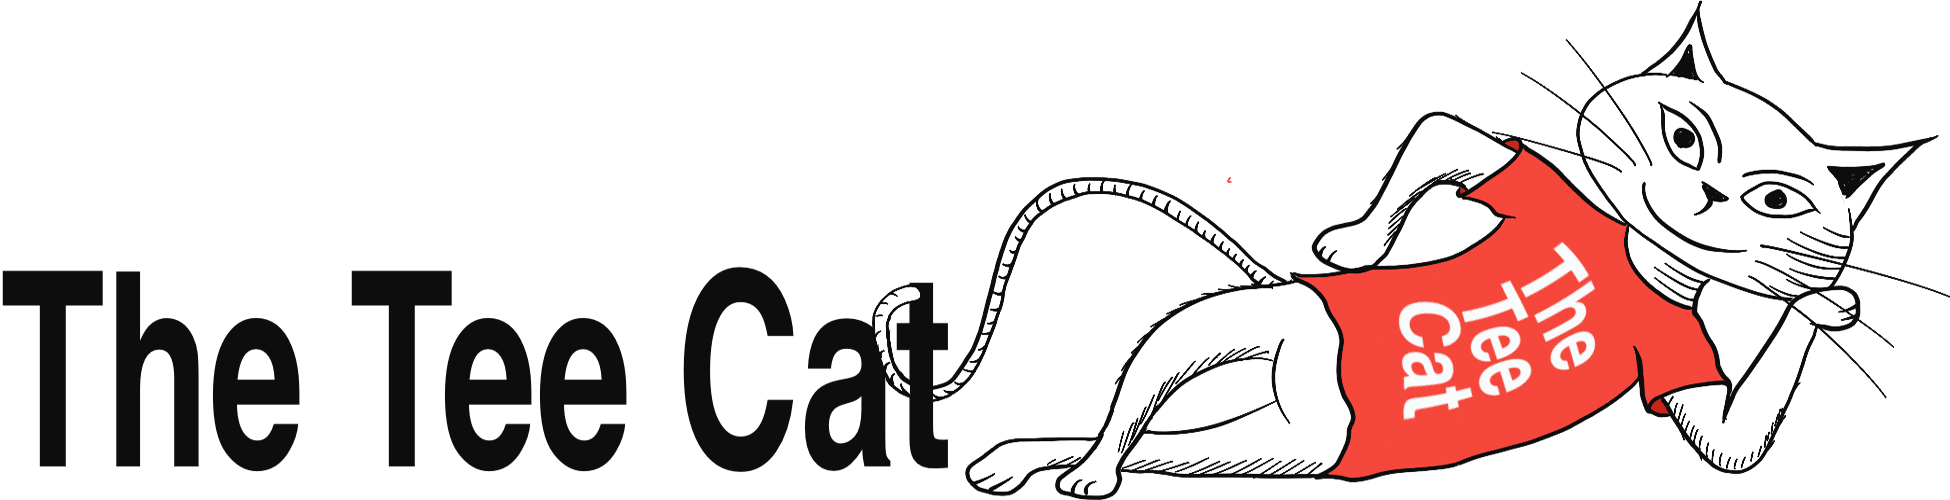 The Tee Cat banner